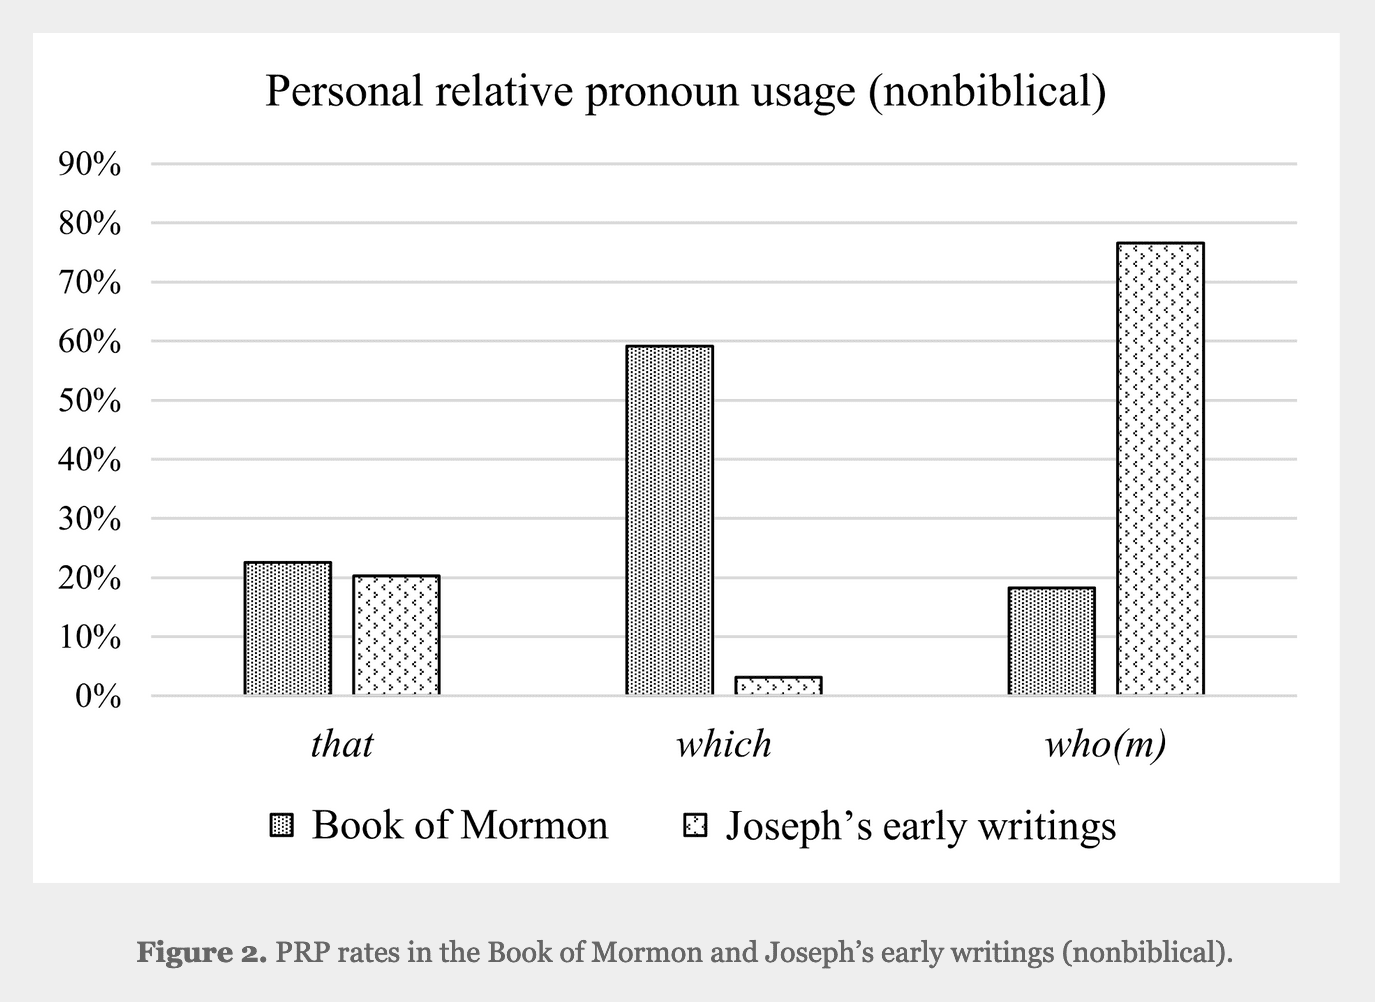 PRP Usage in the Book of Mormon vs. Joseph's Early Writings